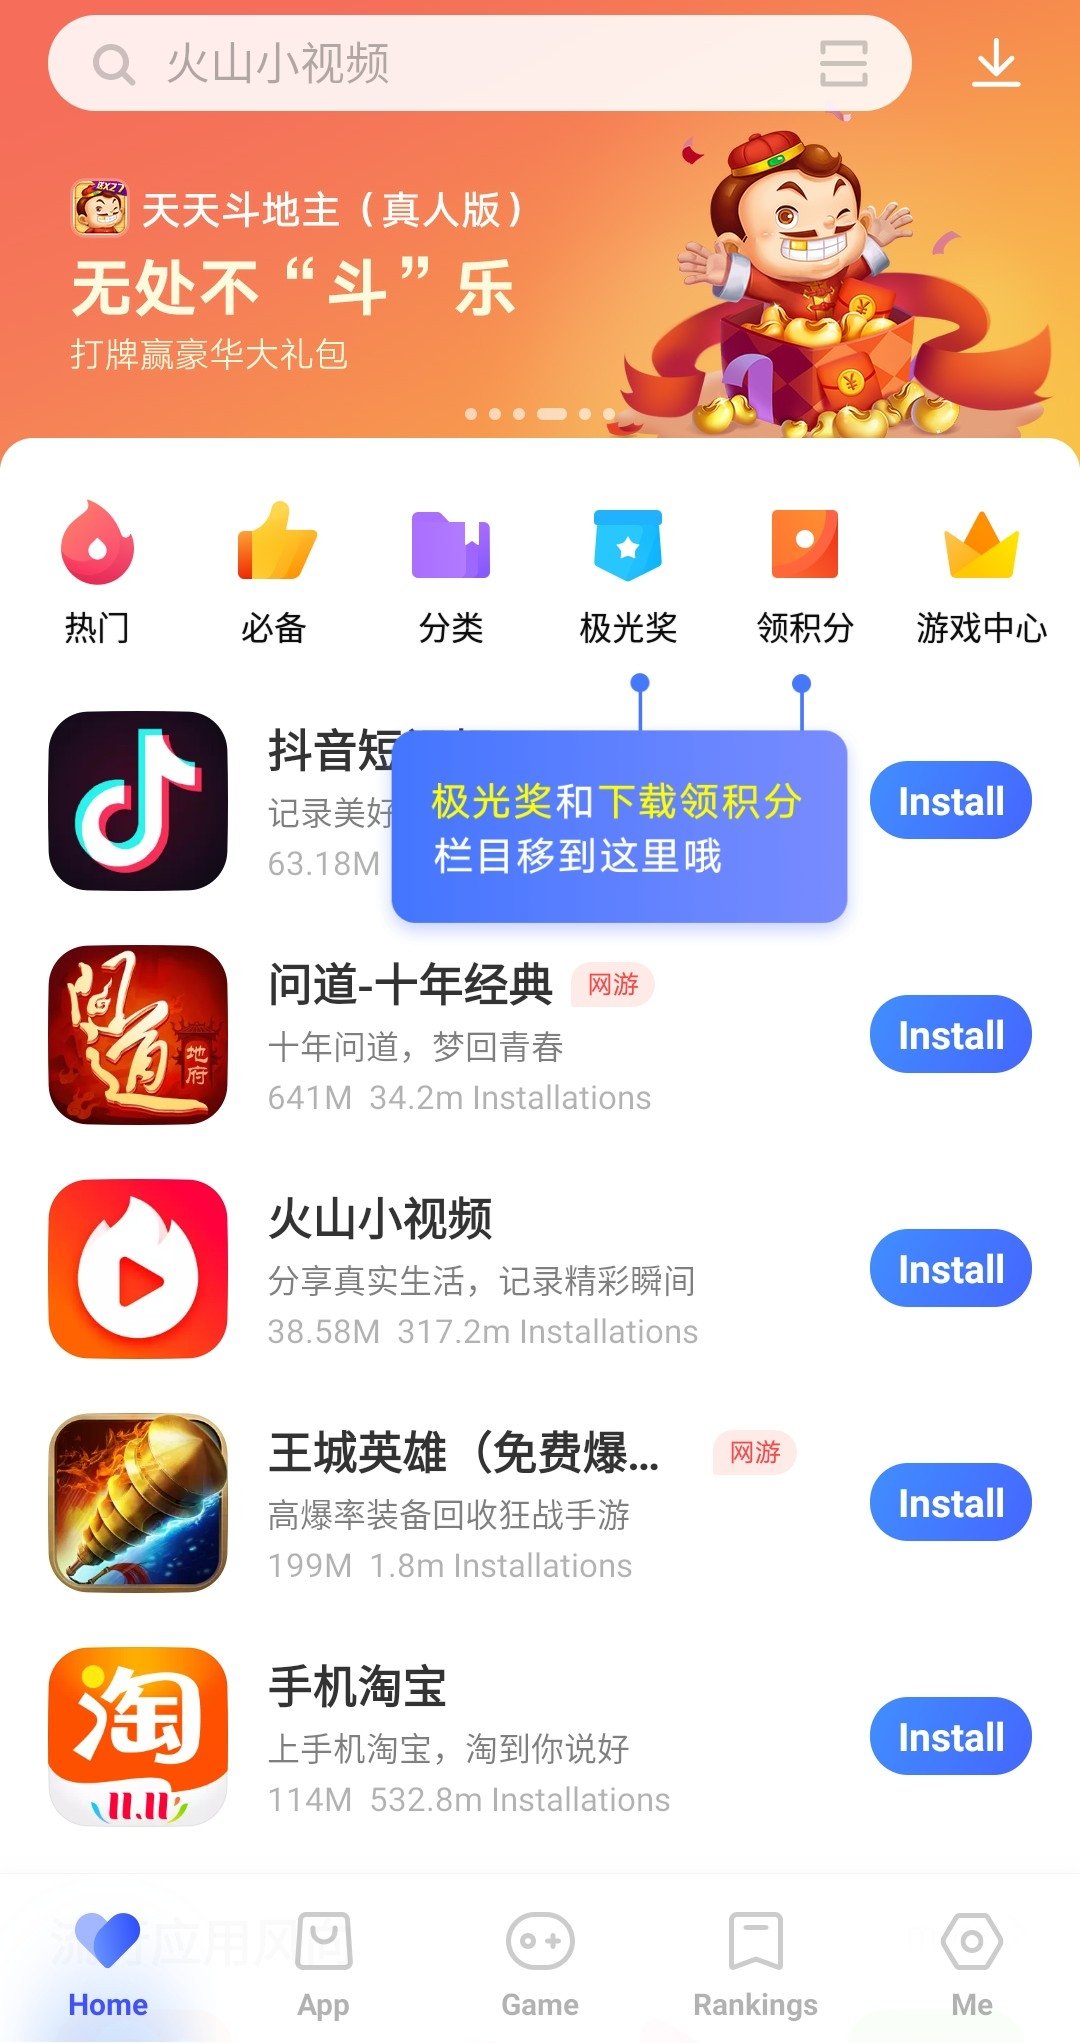 VIVO App Store 8.2.0.0 - Download for Android APK Free